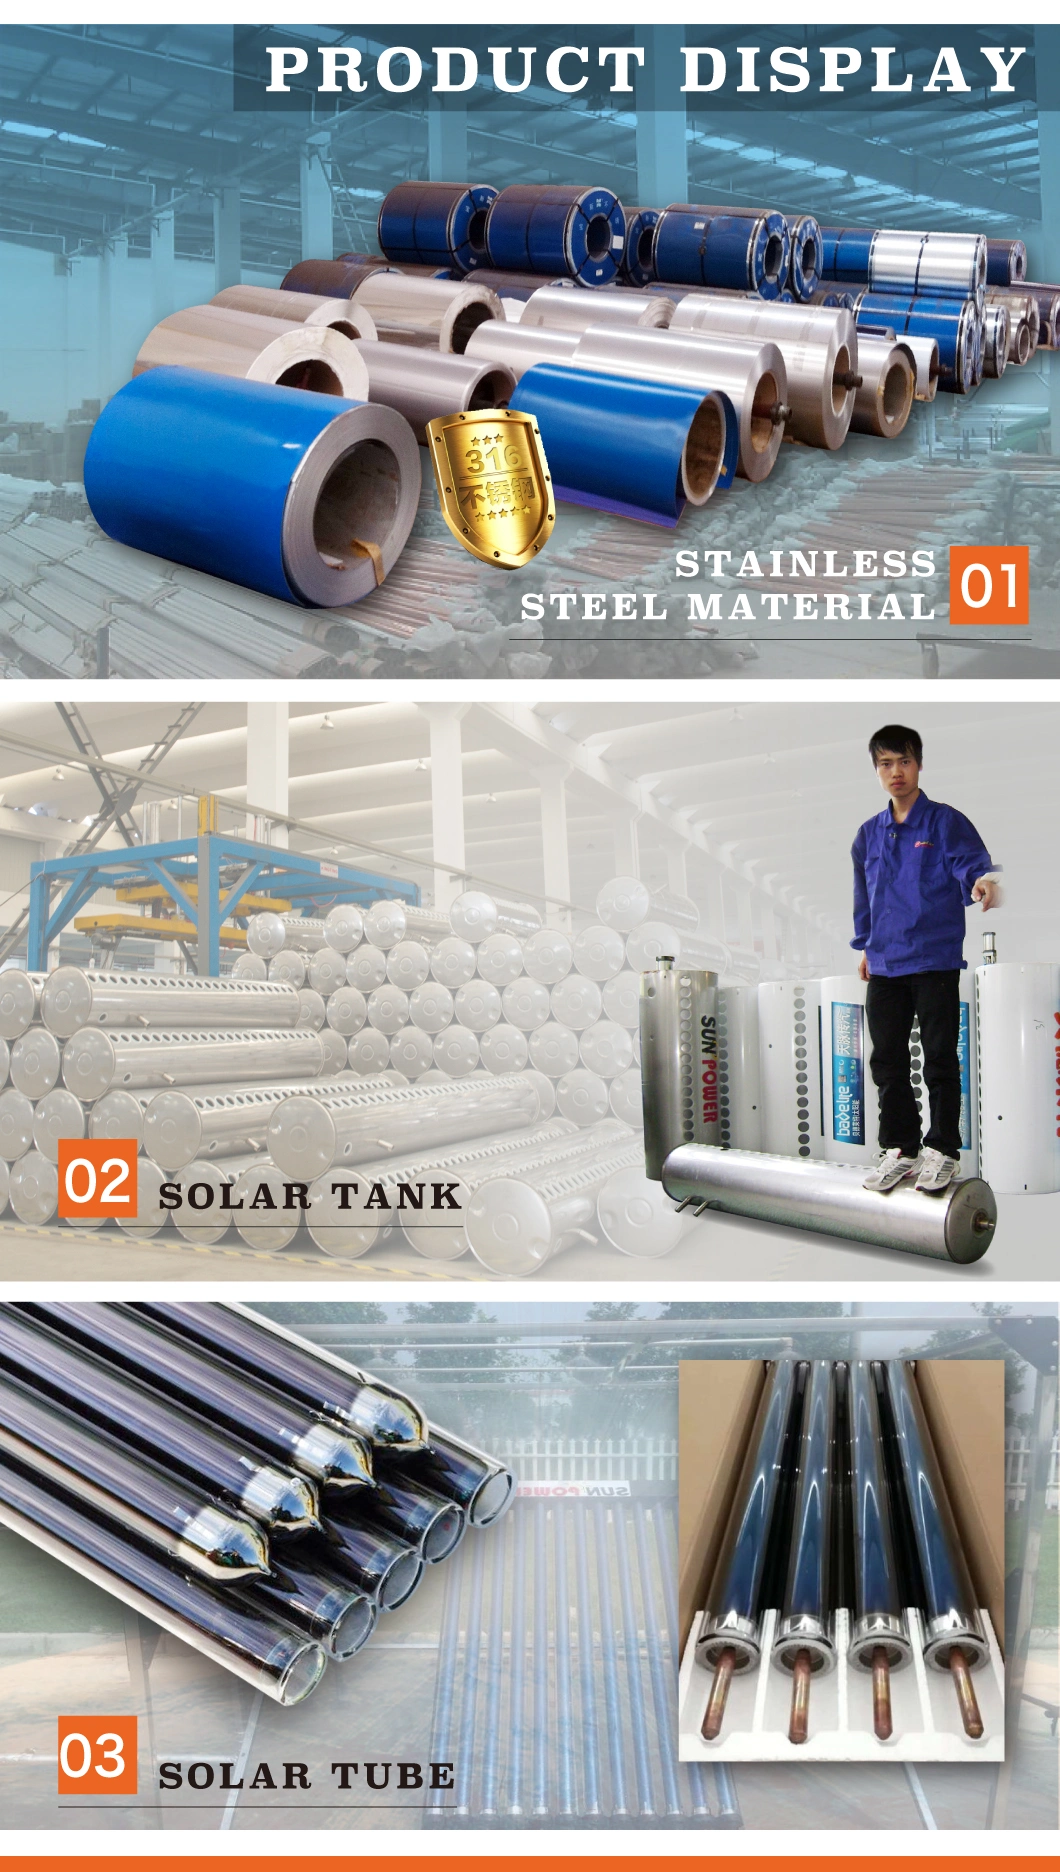 Factory Supply Attractive Price Compact Low Pressure Vacuum Tubes Solar Water Heater